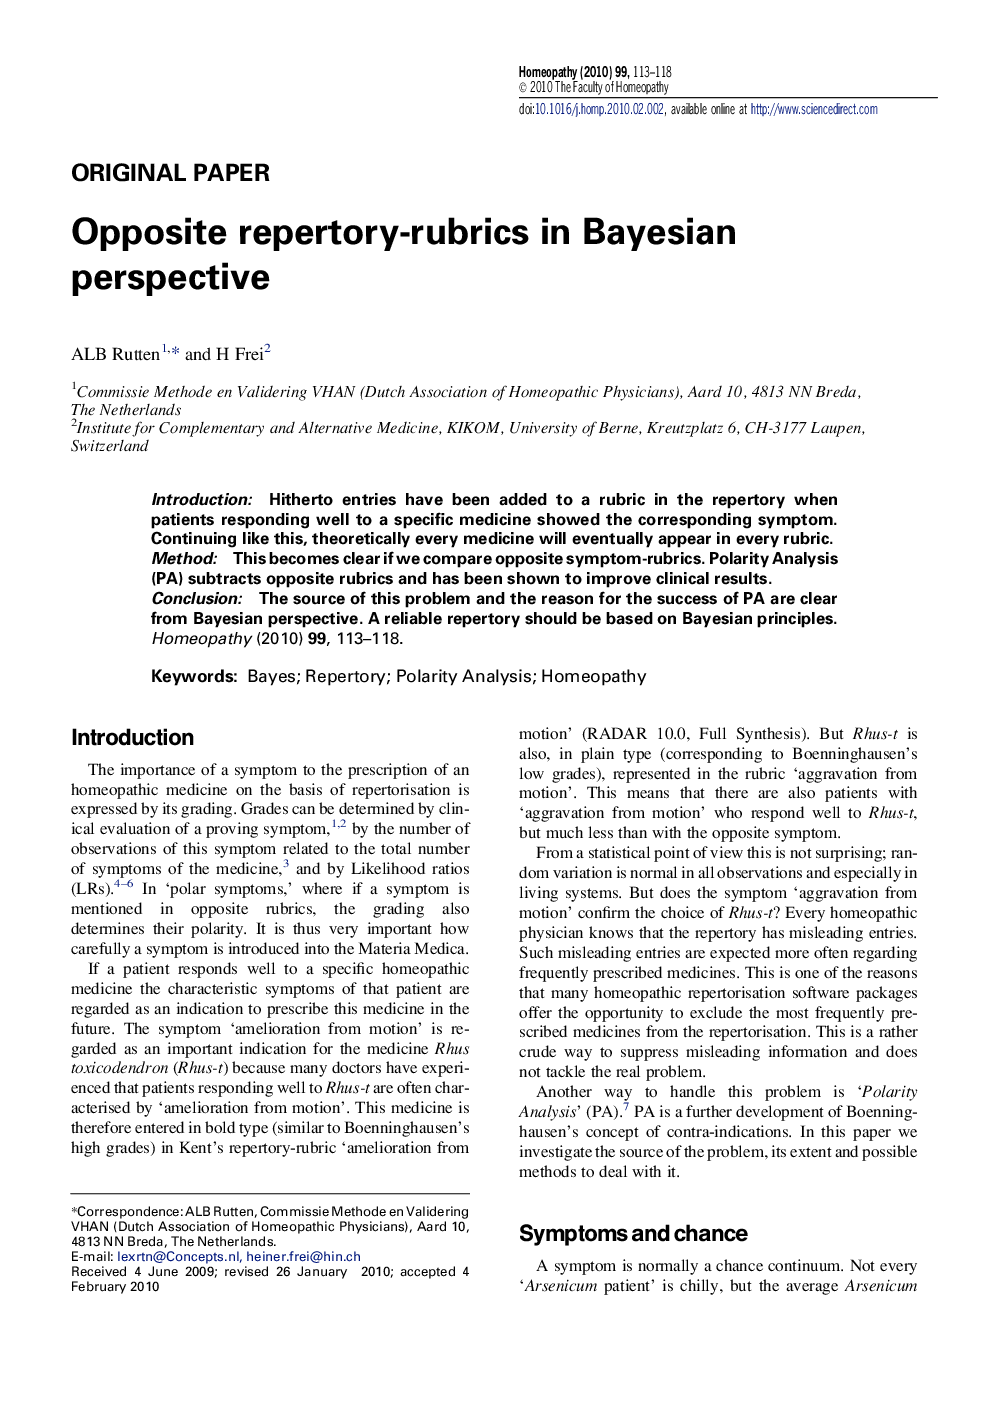 Opposite repertory-rubrics in Bayesian perspective